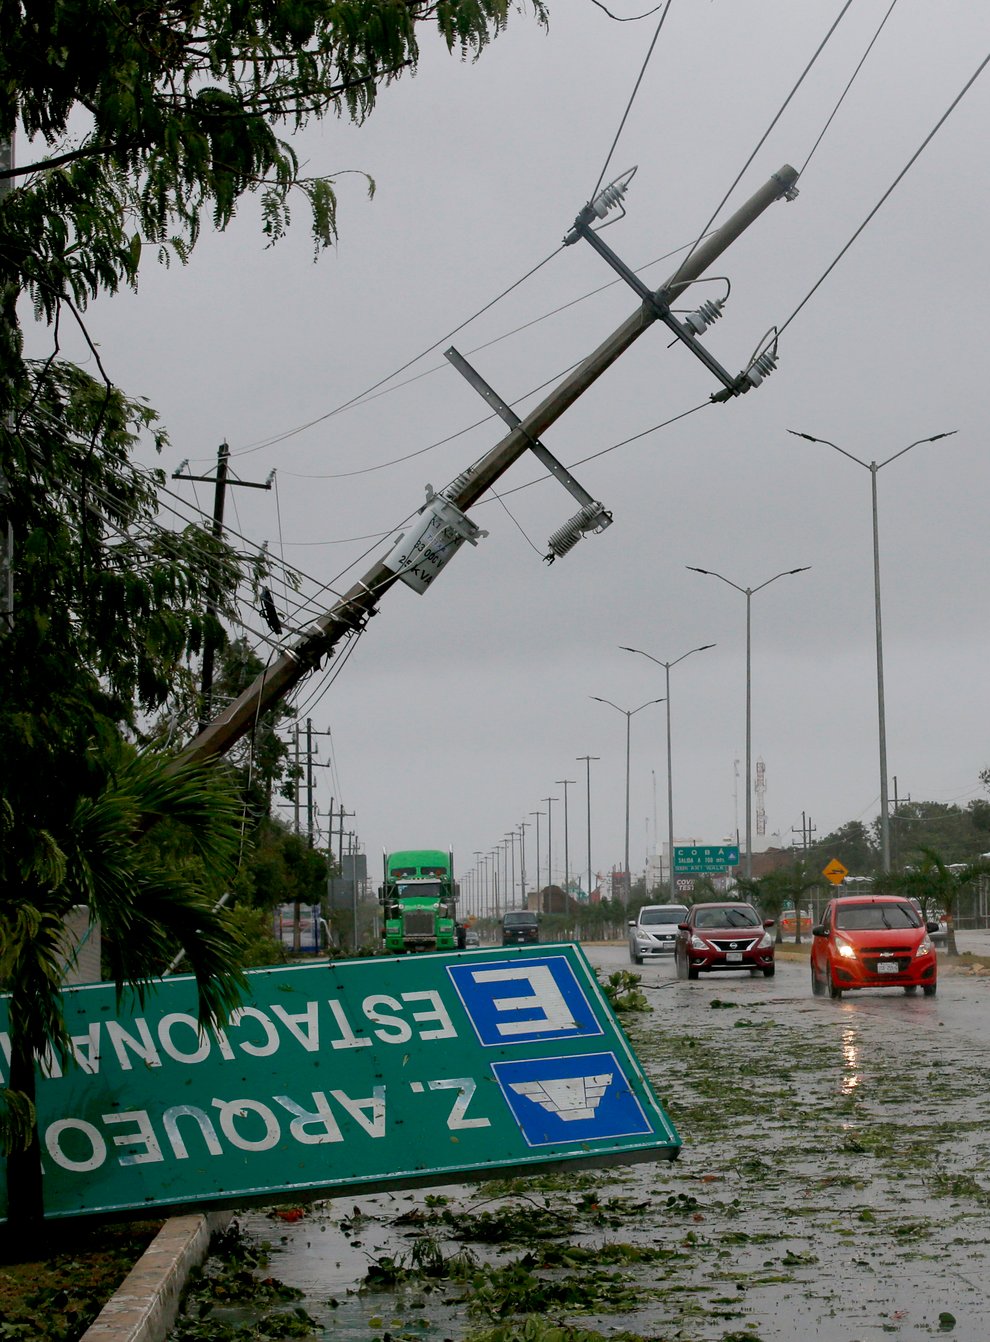 A road sign brought down by the winds of Hurricane Grace lays on the side of the highway in Tulum, Quintana Roo state, Mexico, Thursday, Aug. 19, 2021. The Category 1 storm made landfall at 4:45 a.m., just south of the ancient Mayan temples of Tulum, pelting the Caribbean coast with heavy rain and pushing a dangerous storm surge. (AP Photo/Marco Ugarte)